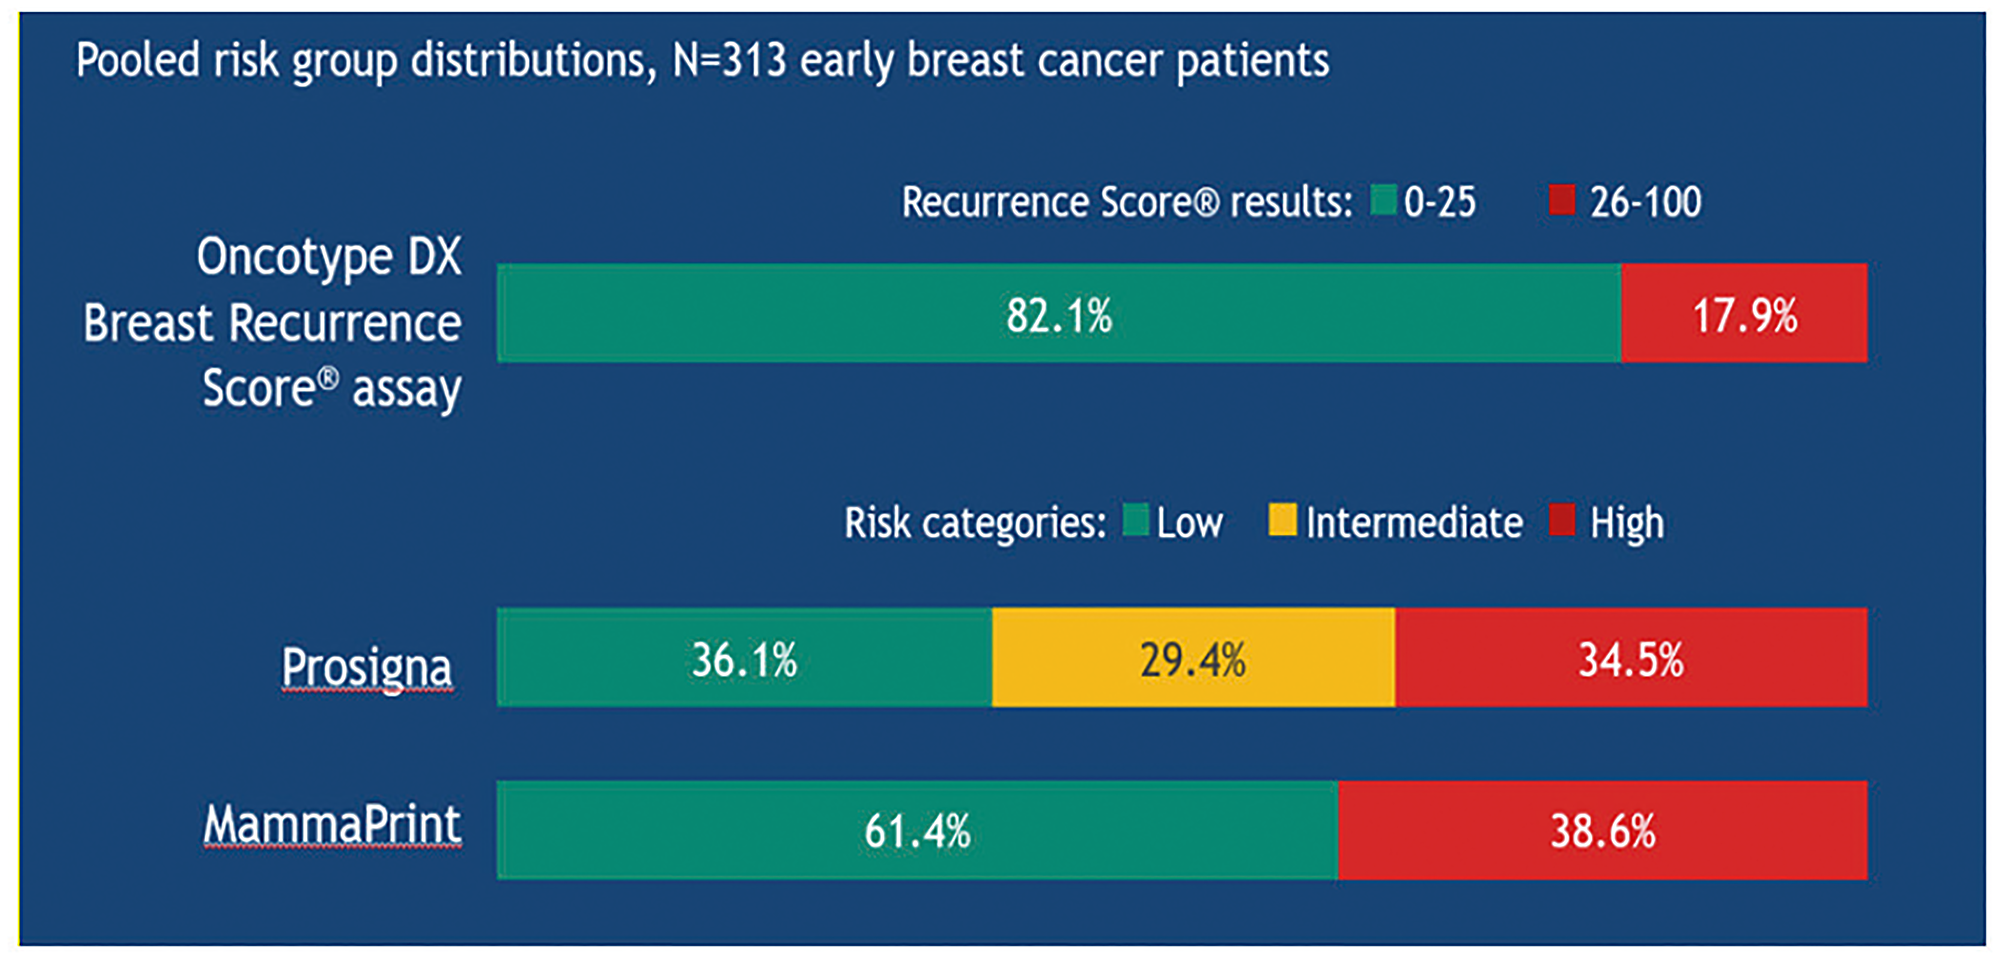 Risk stratification in the OPTIMA trial using different diagnostic tests in the same patients with early breast cancer.